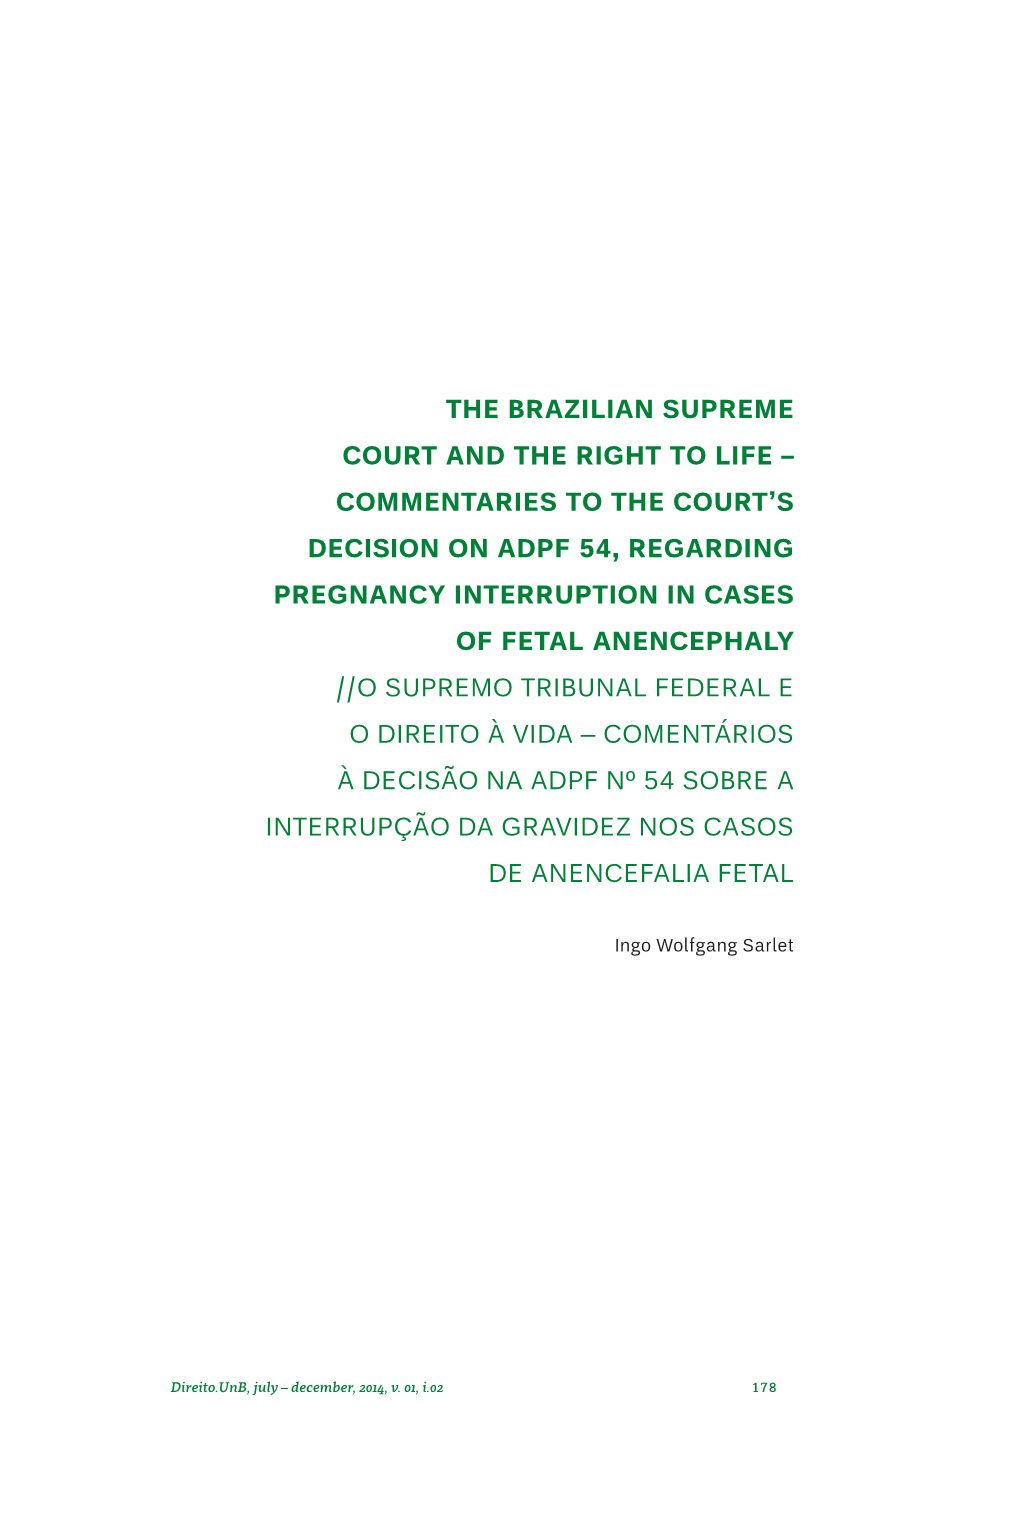 THE Brazilian SUPREME COURT and the RIGHT to LIFE